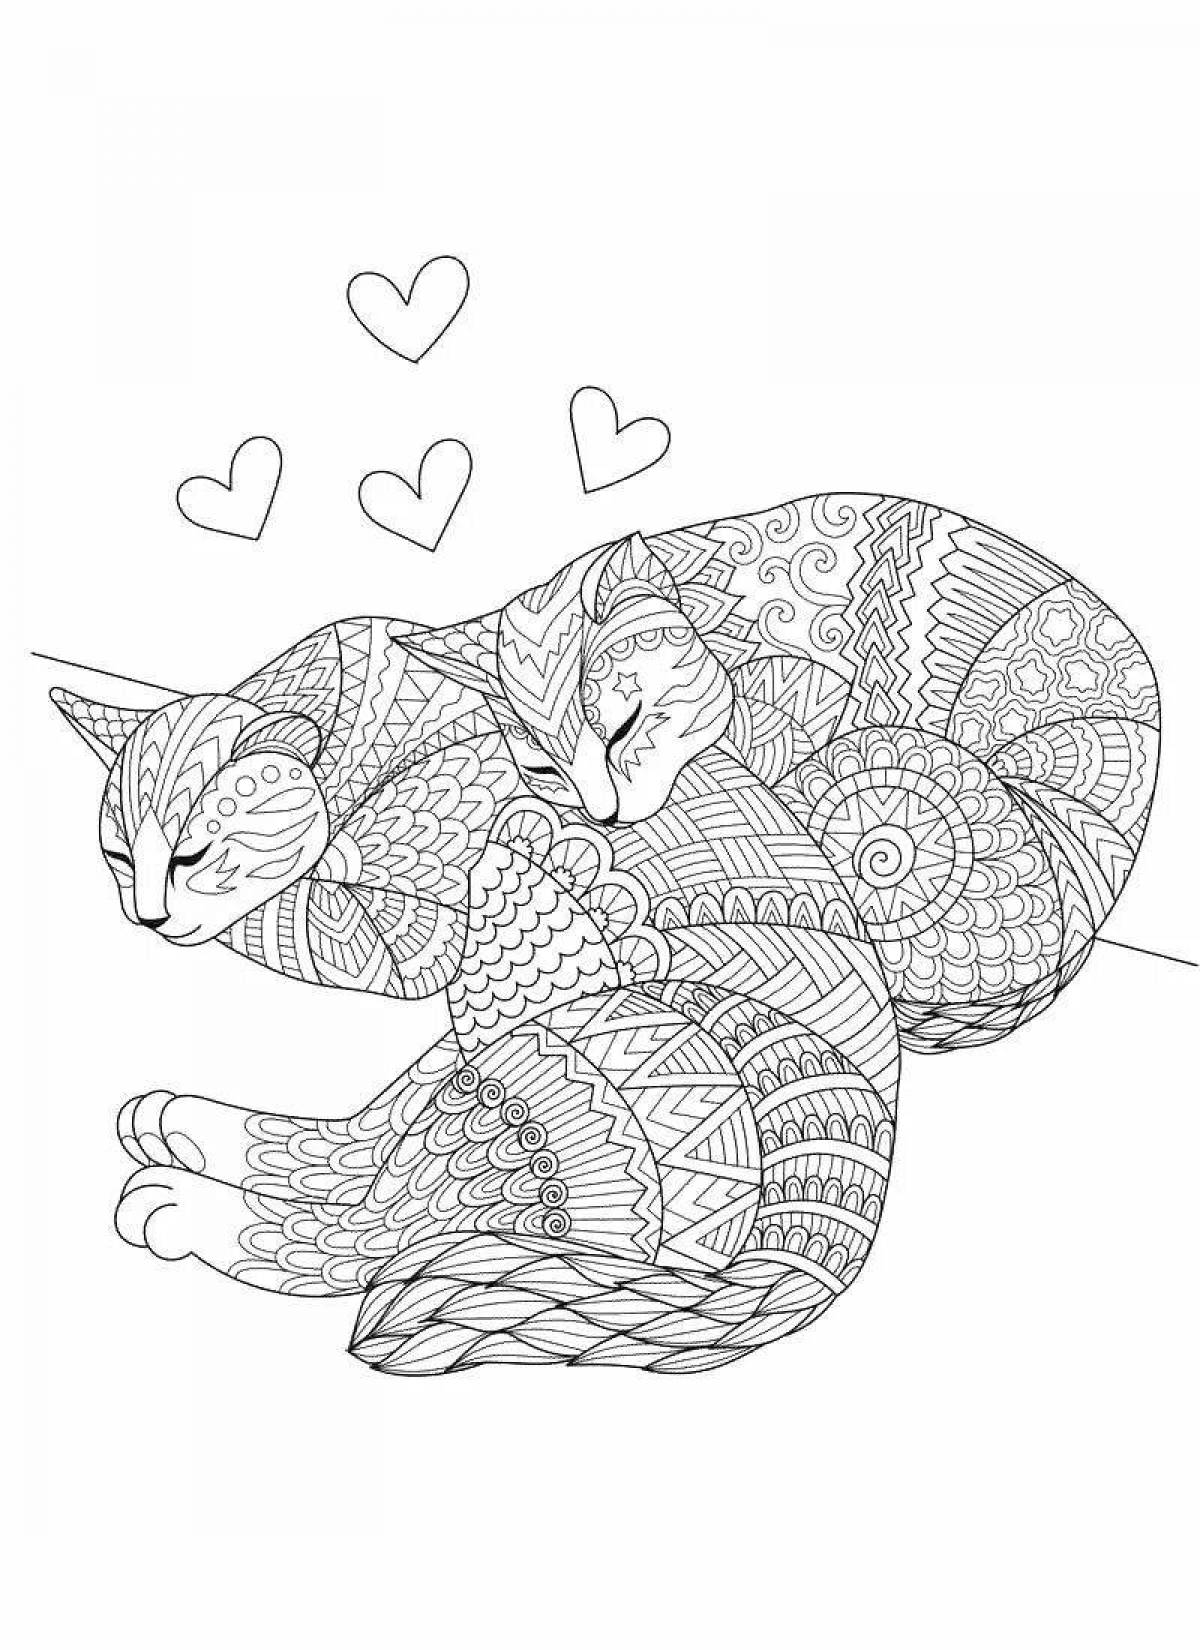 Sublime coloring page for girls 12 years old - cats